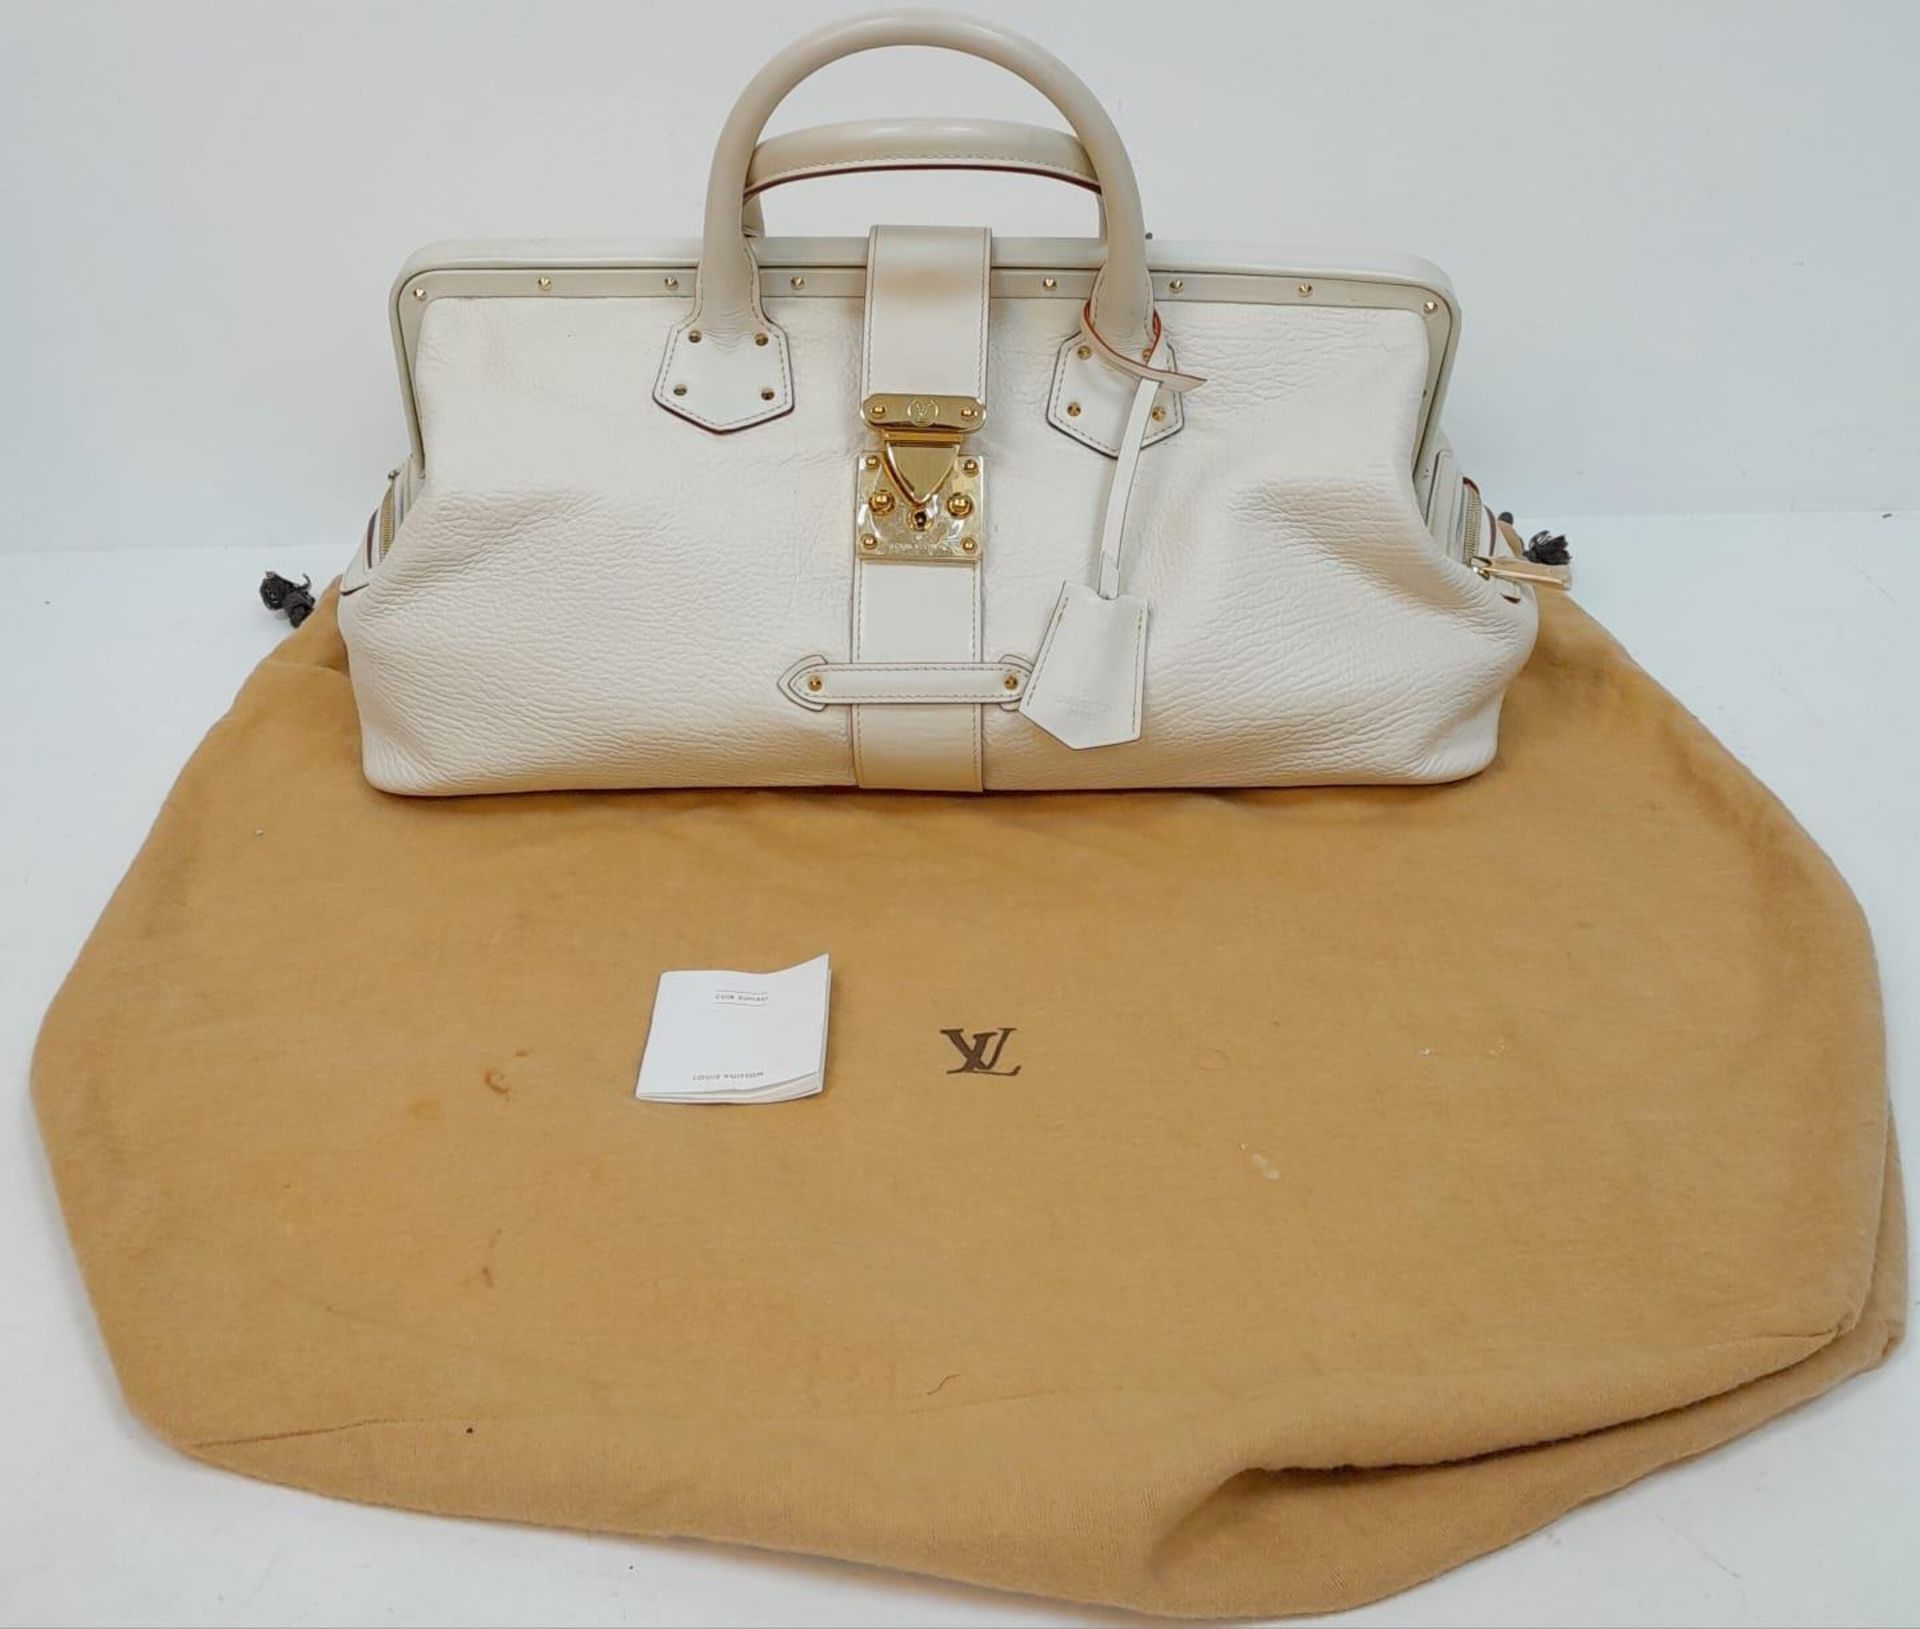 A Louis Vuitton Manhattan PM Suhali Leather Handbag. Soft white textured leather exterior with - Image 8 of 8